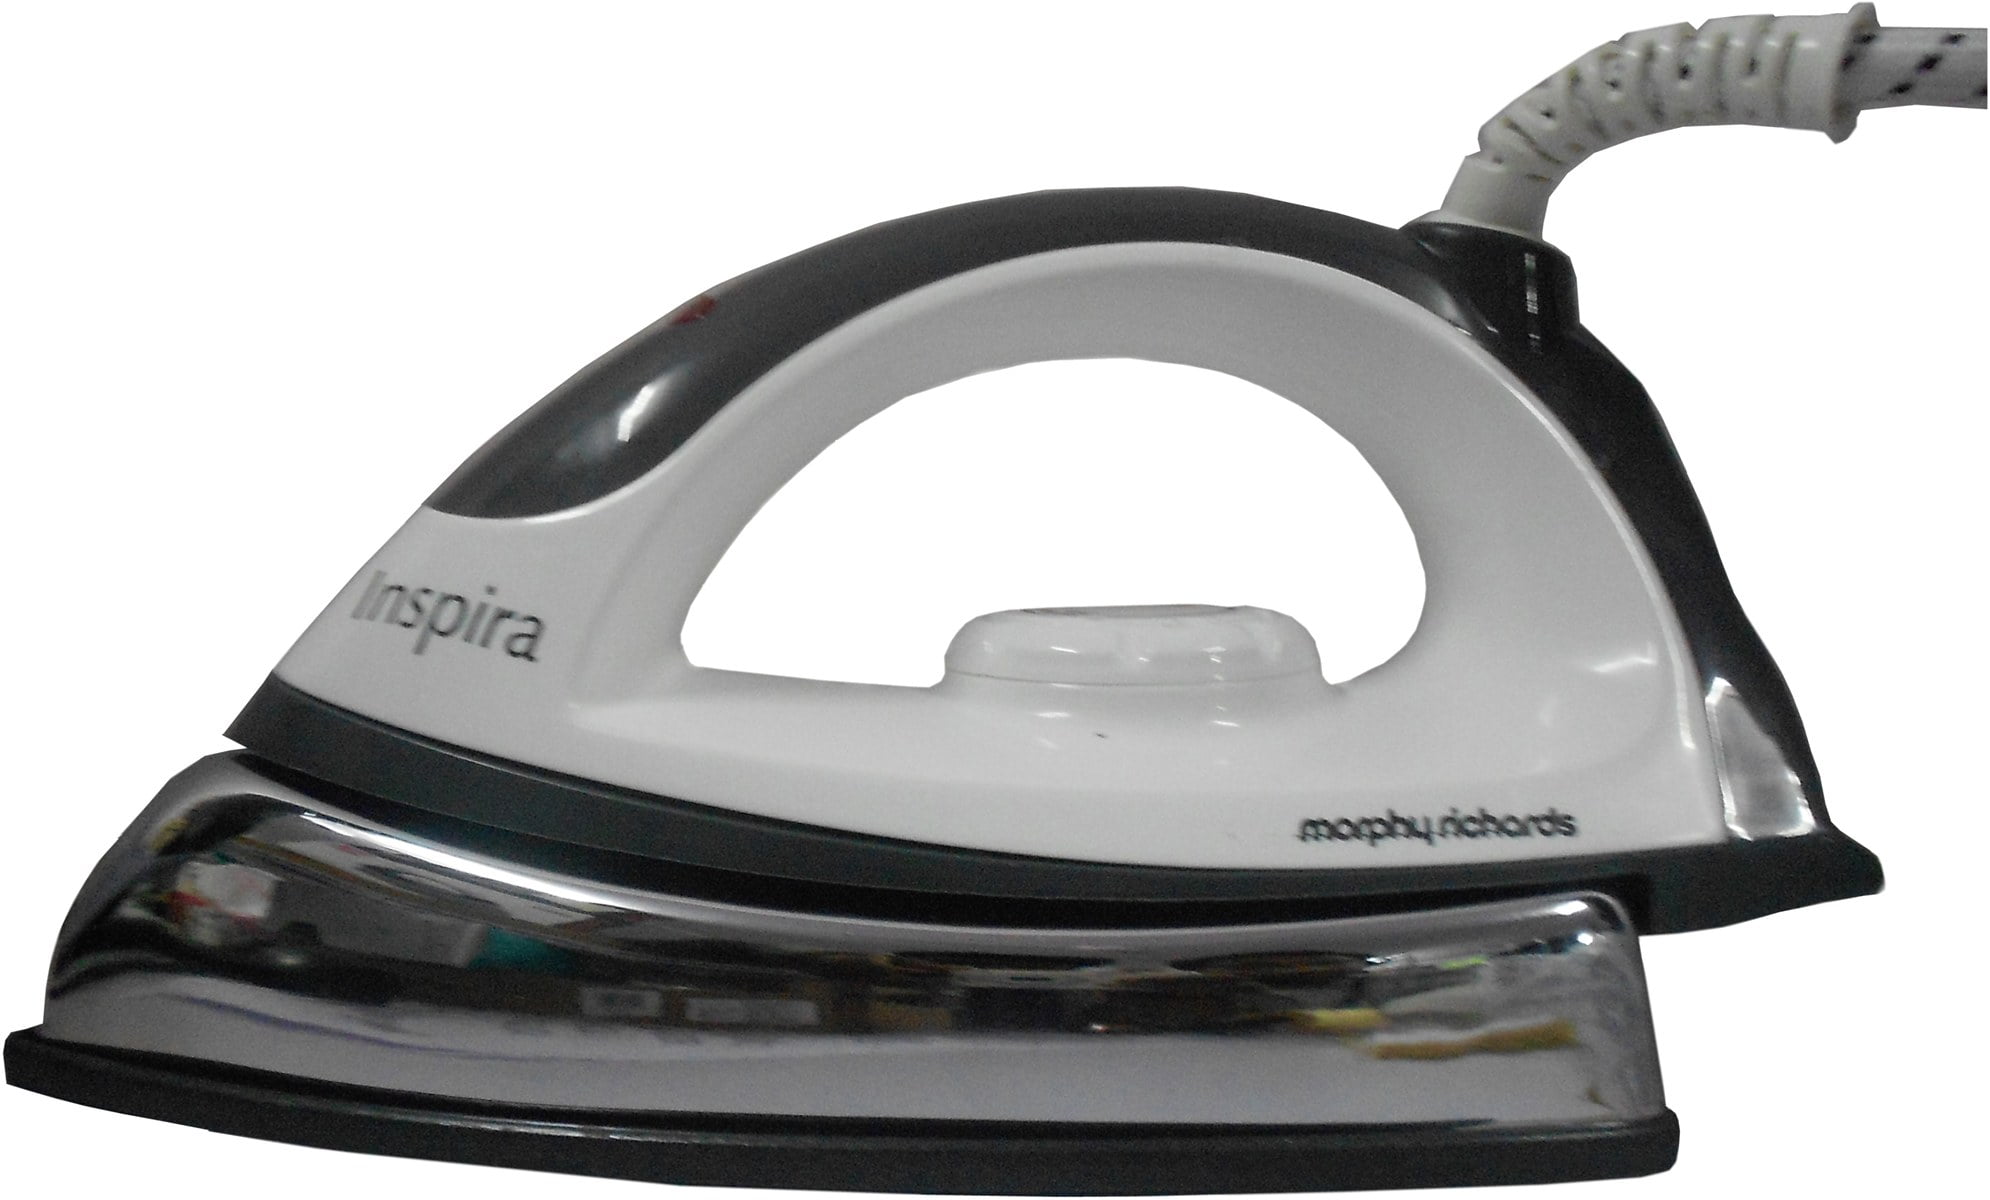 Morphy Richards Inspira 1000-Watt Dry Iron Review and Specifications